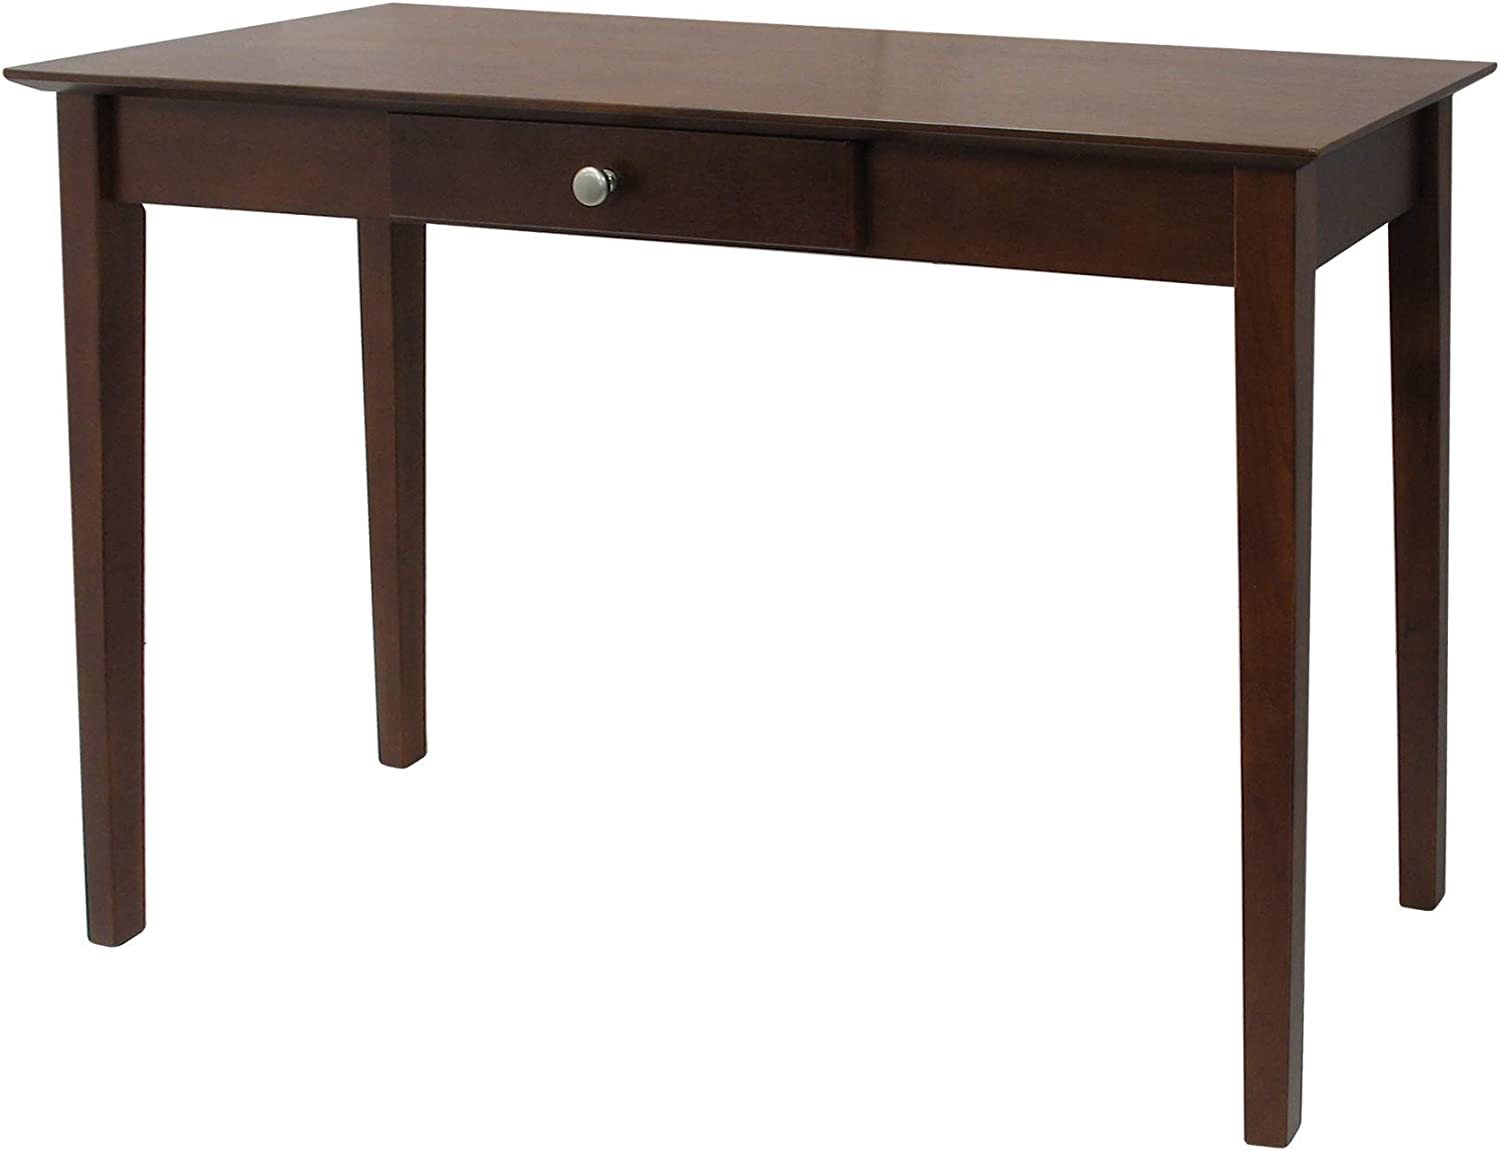 Winsome Wood Rochester Occasional Table, Antique Walnut - $102.99